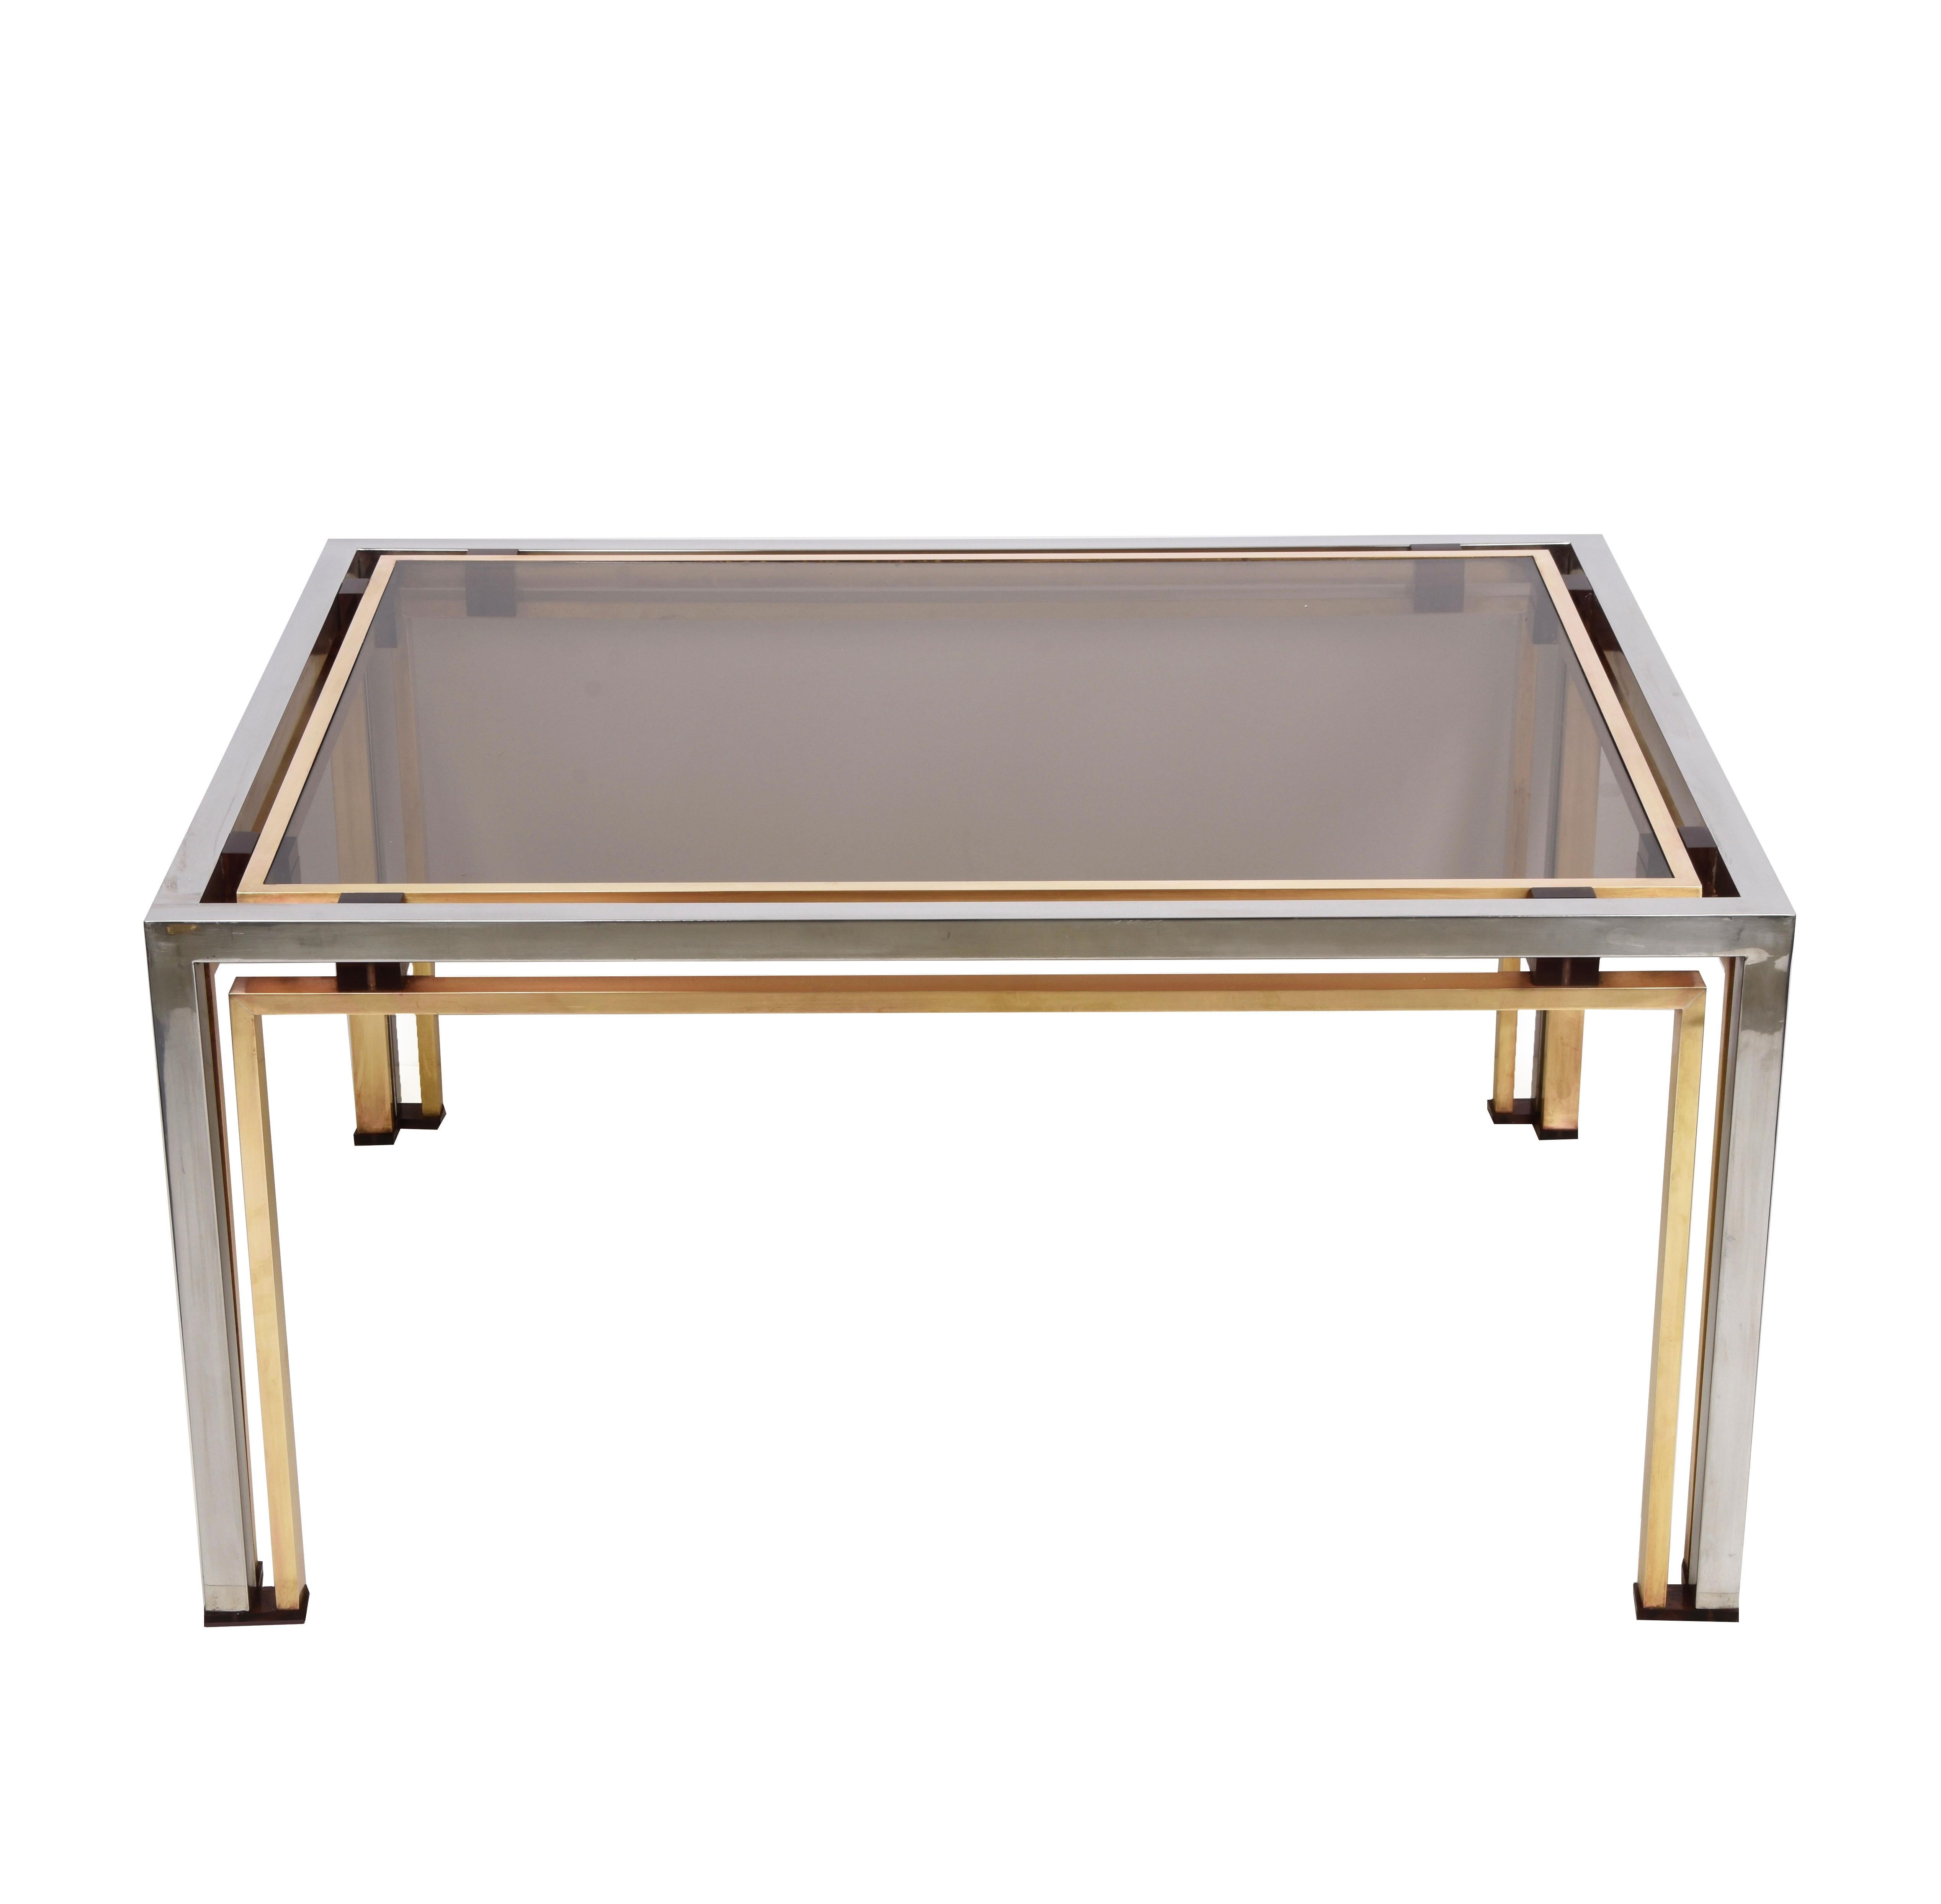 Mid-Century solid brass and chromed coffee table with smoked glass top and amethyst Lucite blocks. This fantastic object was designed by Romeo Rega in Italy in the 1970s.

This coffee table, thanks to the chromed metal and brass structure, and